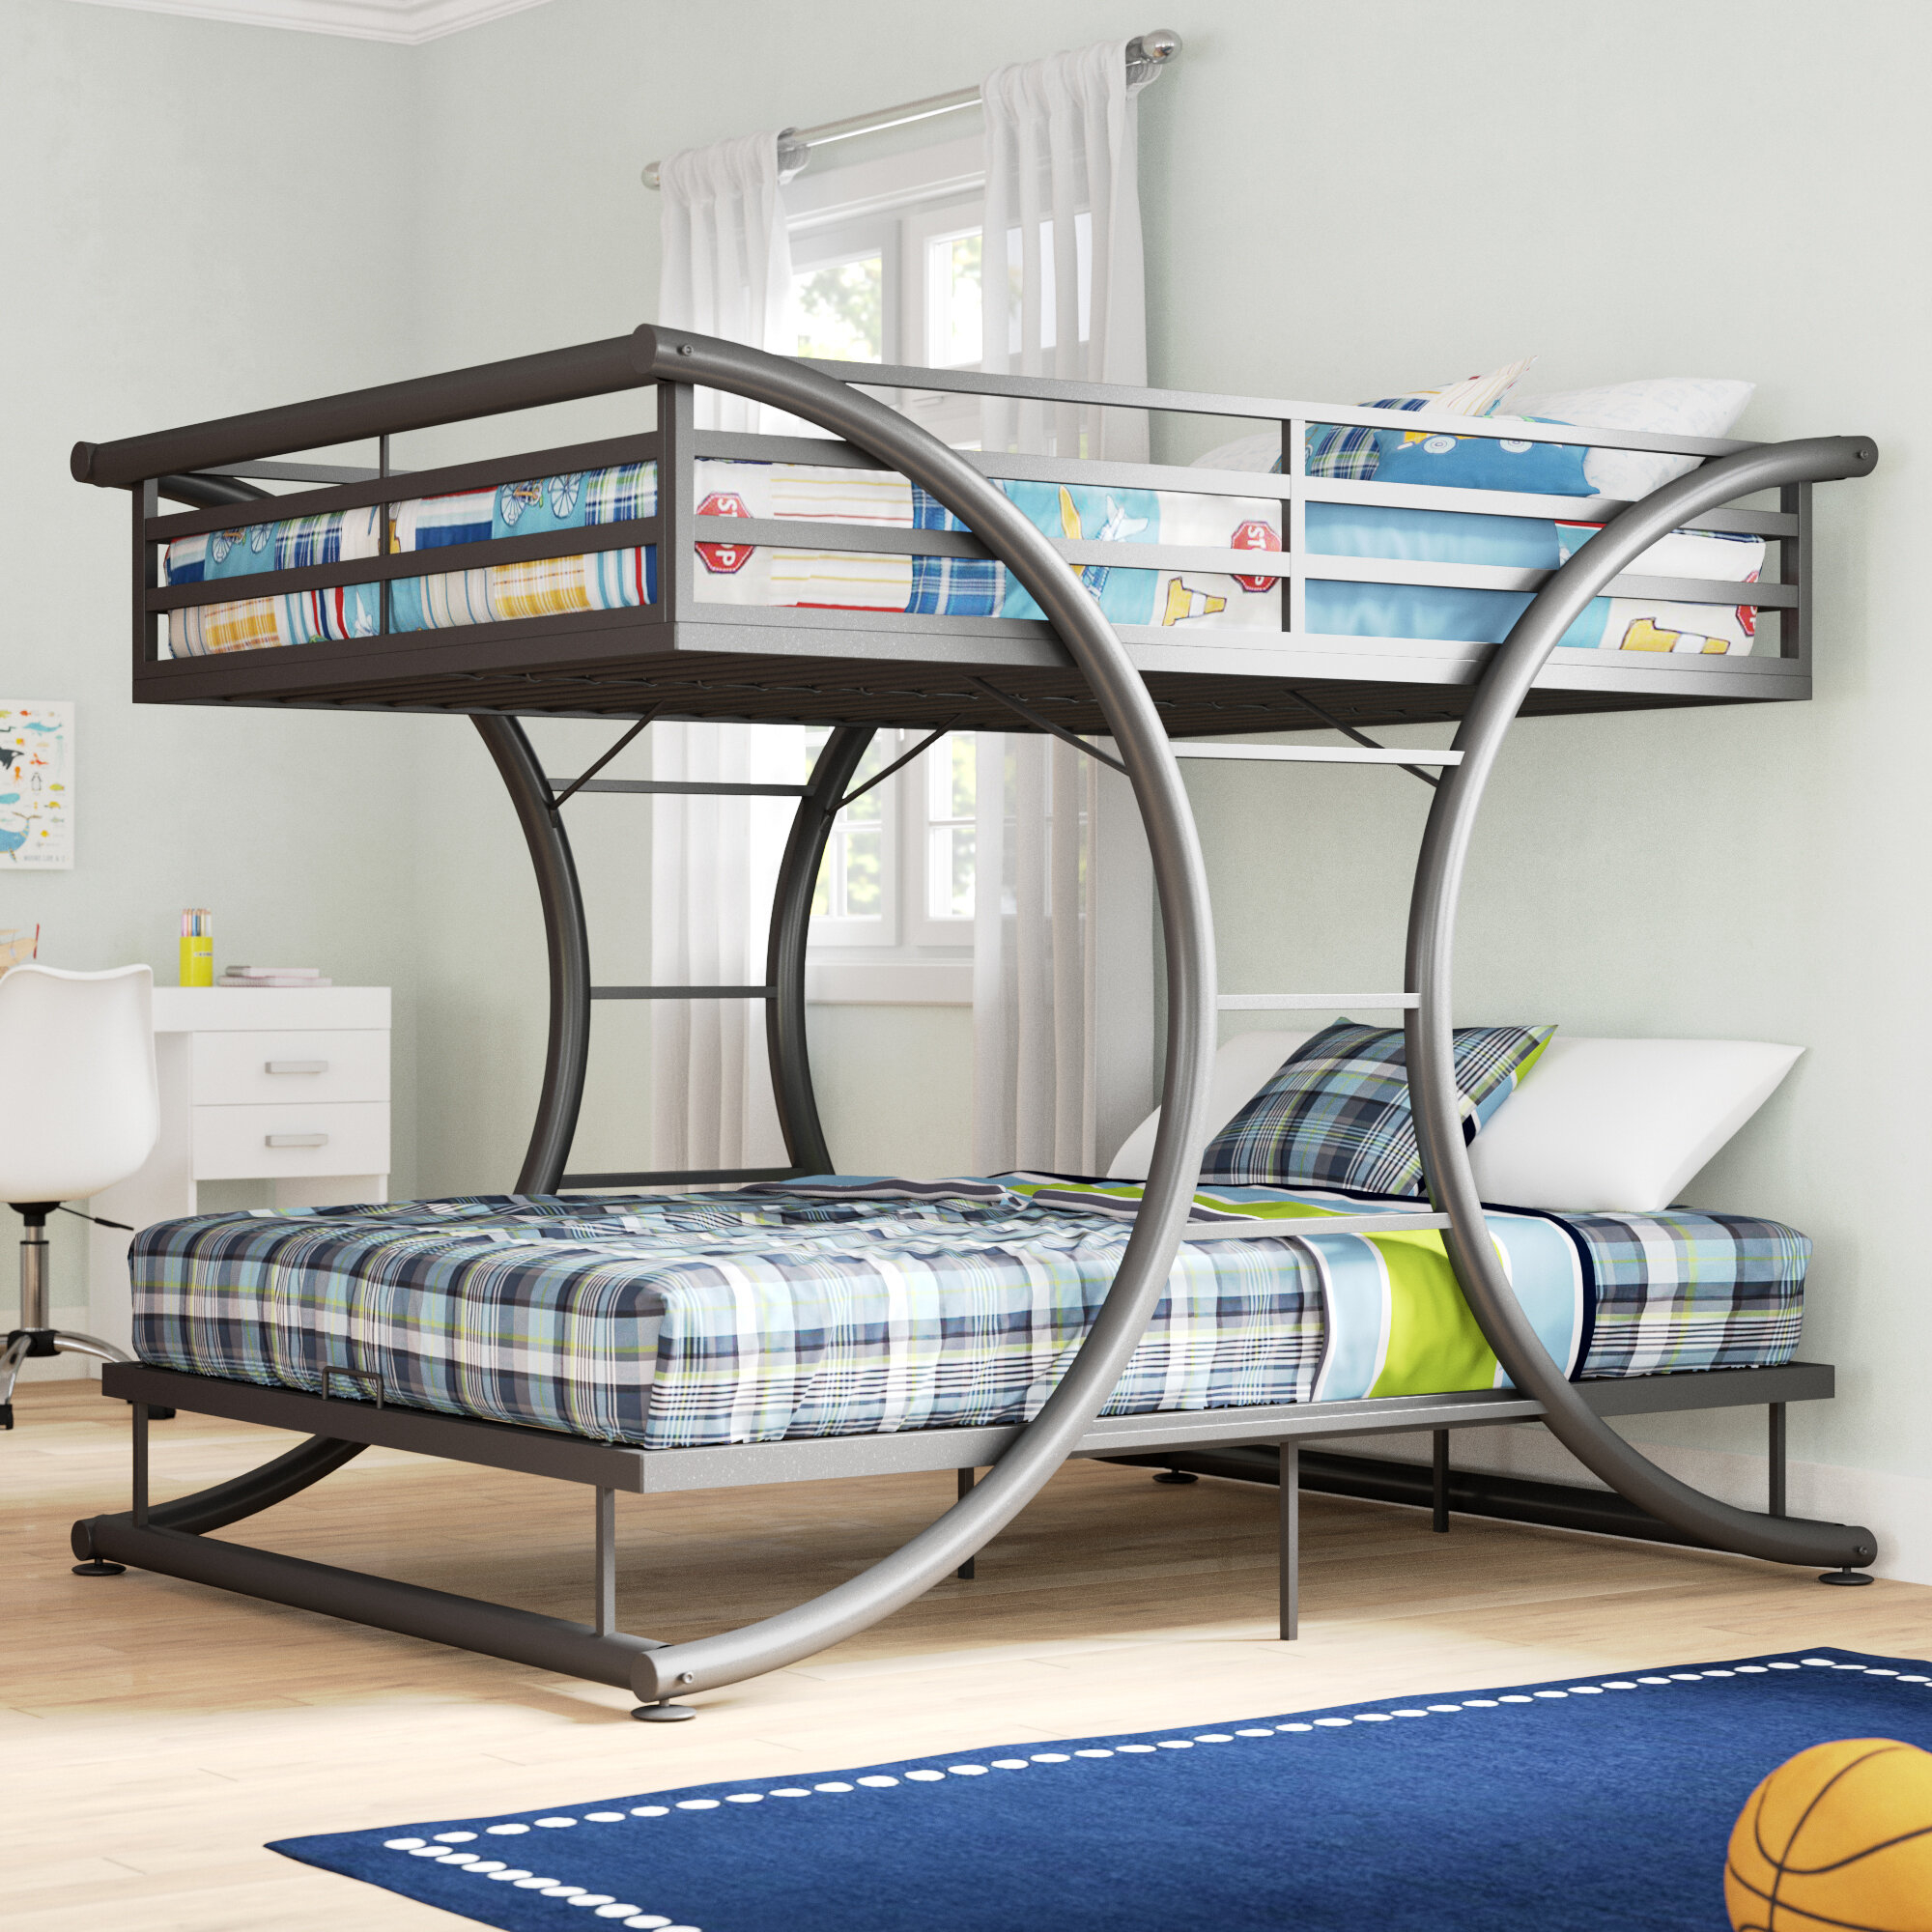 Heavy Duty Bunk Beds Visualhunt, Heavy Metal Full Over Bunk Bed